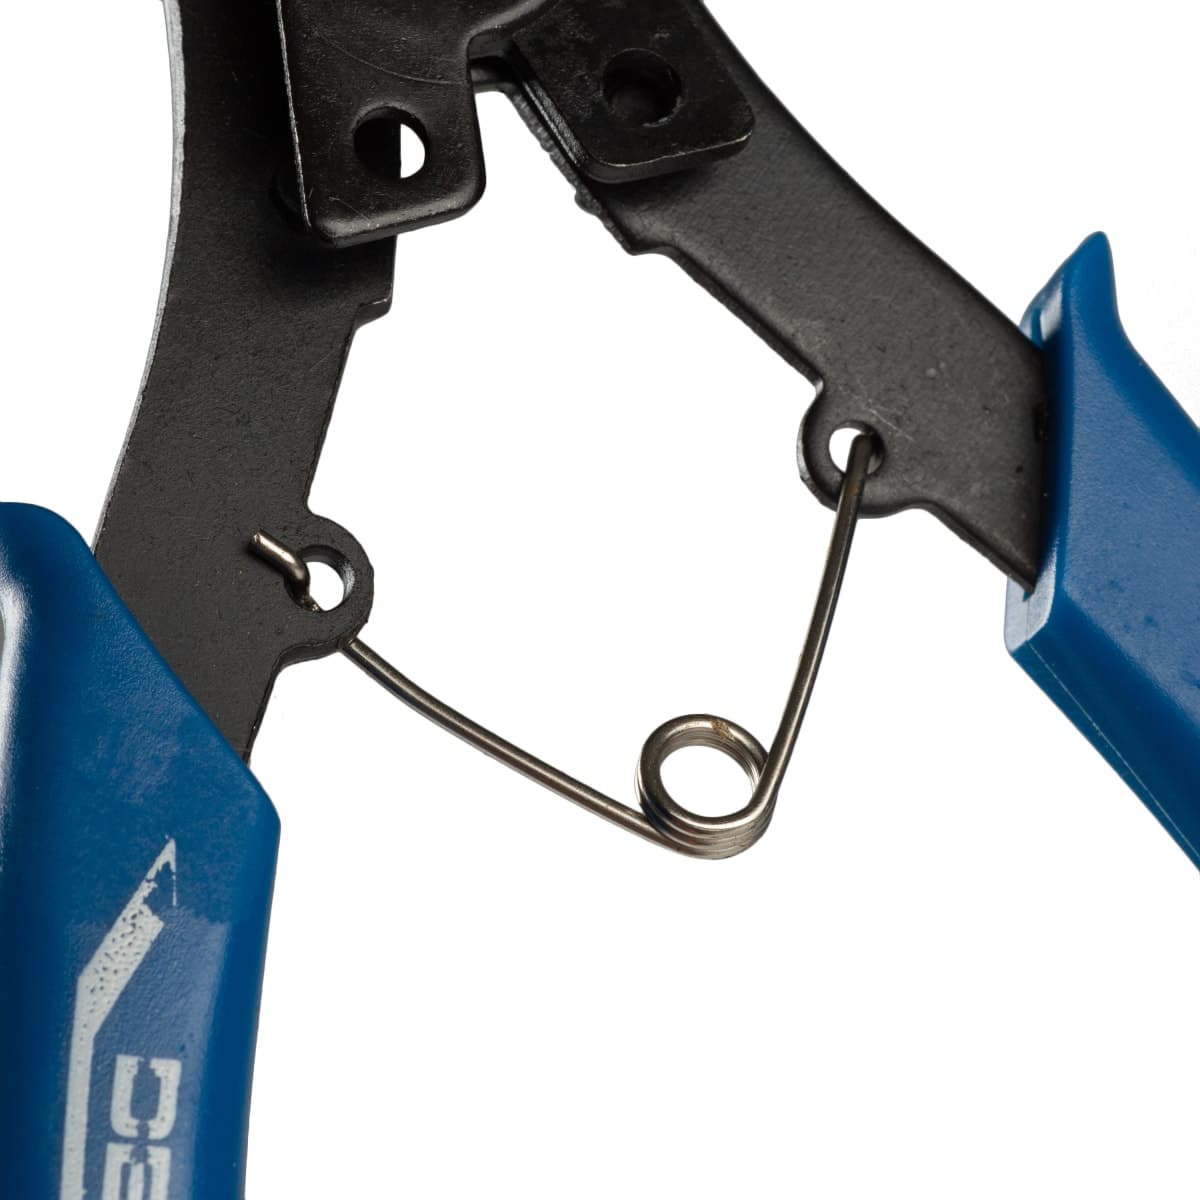 DEXTER 150 MM RING PLIERS WITH INTERCHANGEABLE HEAD - best price from Maltashopper.com BR400001915